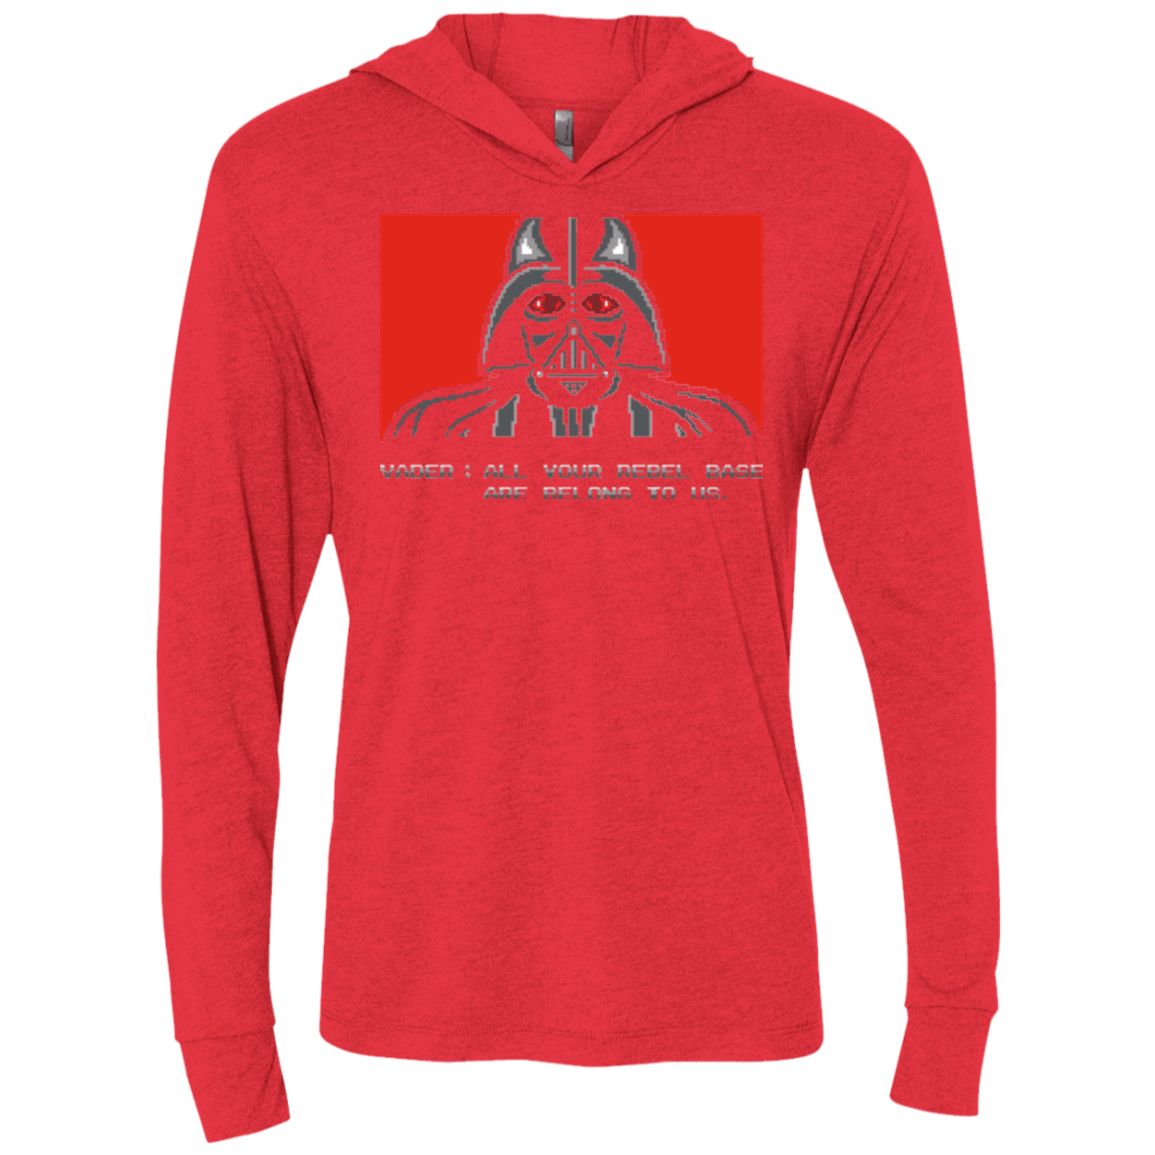 T-Shirts Vintage Red / X-Small All your rebel base are belongs to us Triblend Long Sleeve Hoodie Tee